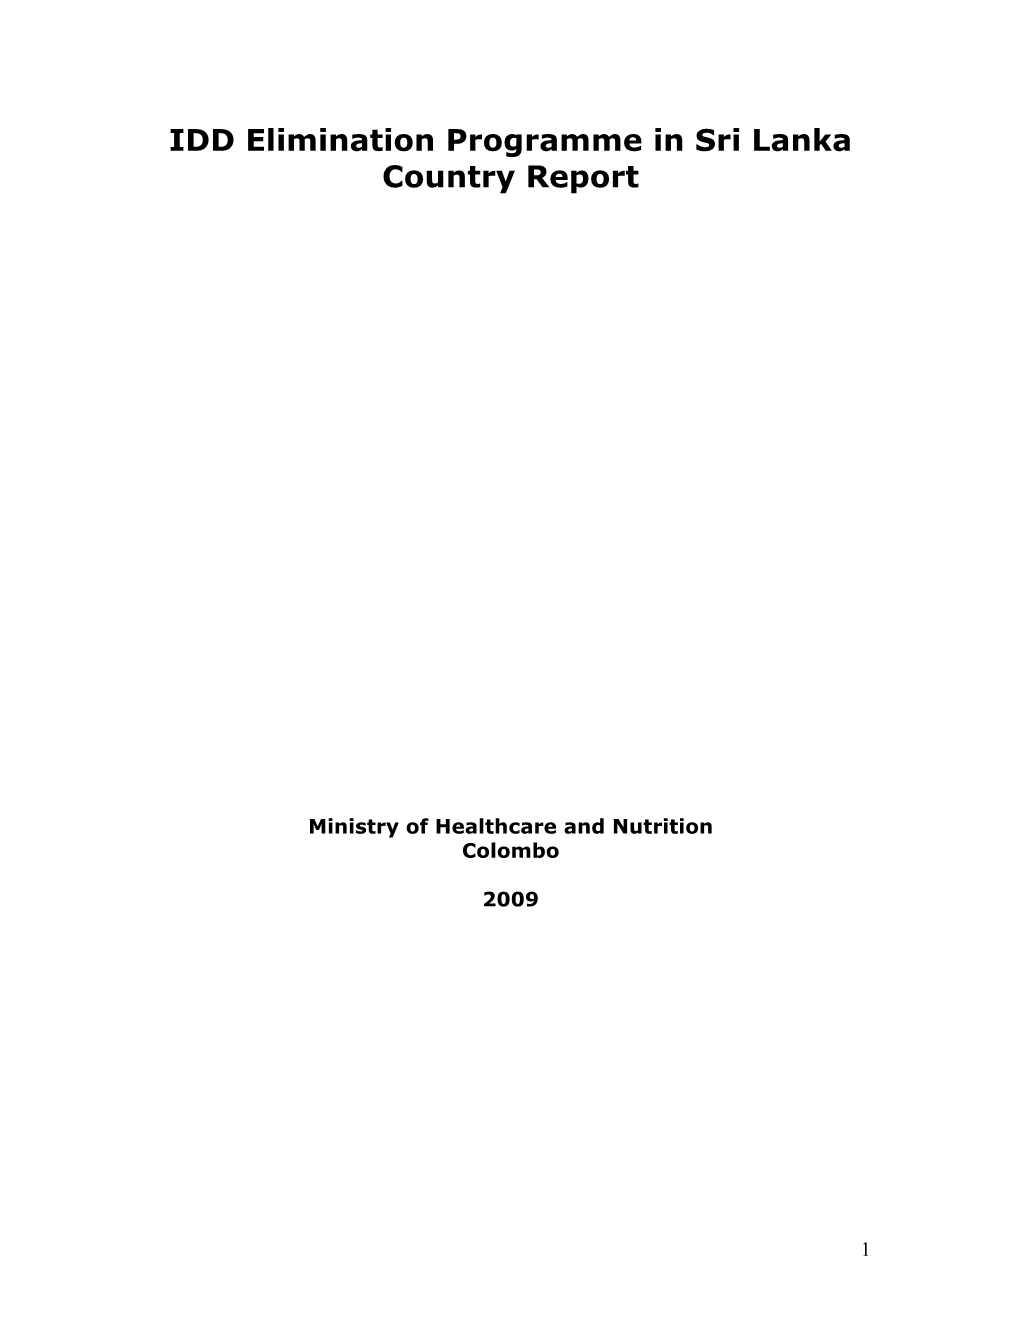 IDD Elimination Programme in Sri Lanka Country Report